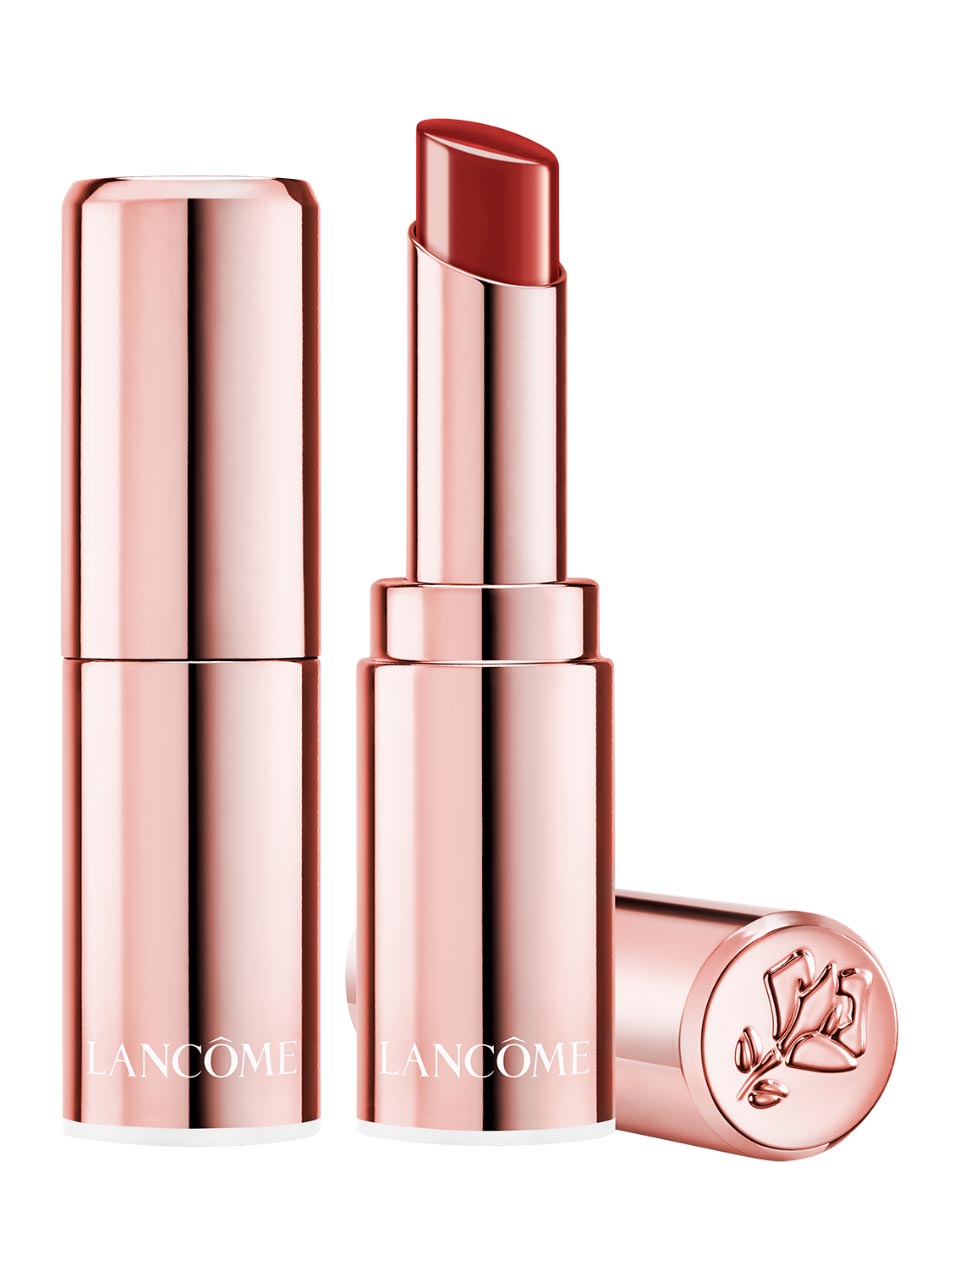 Lancôme Mademoiselle Shine Lipstick N° 196 Shine with passion null - onesize - 1